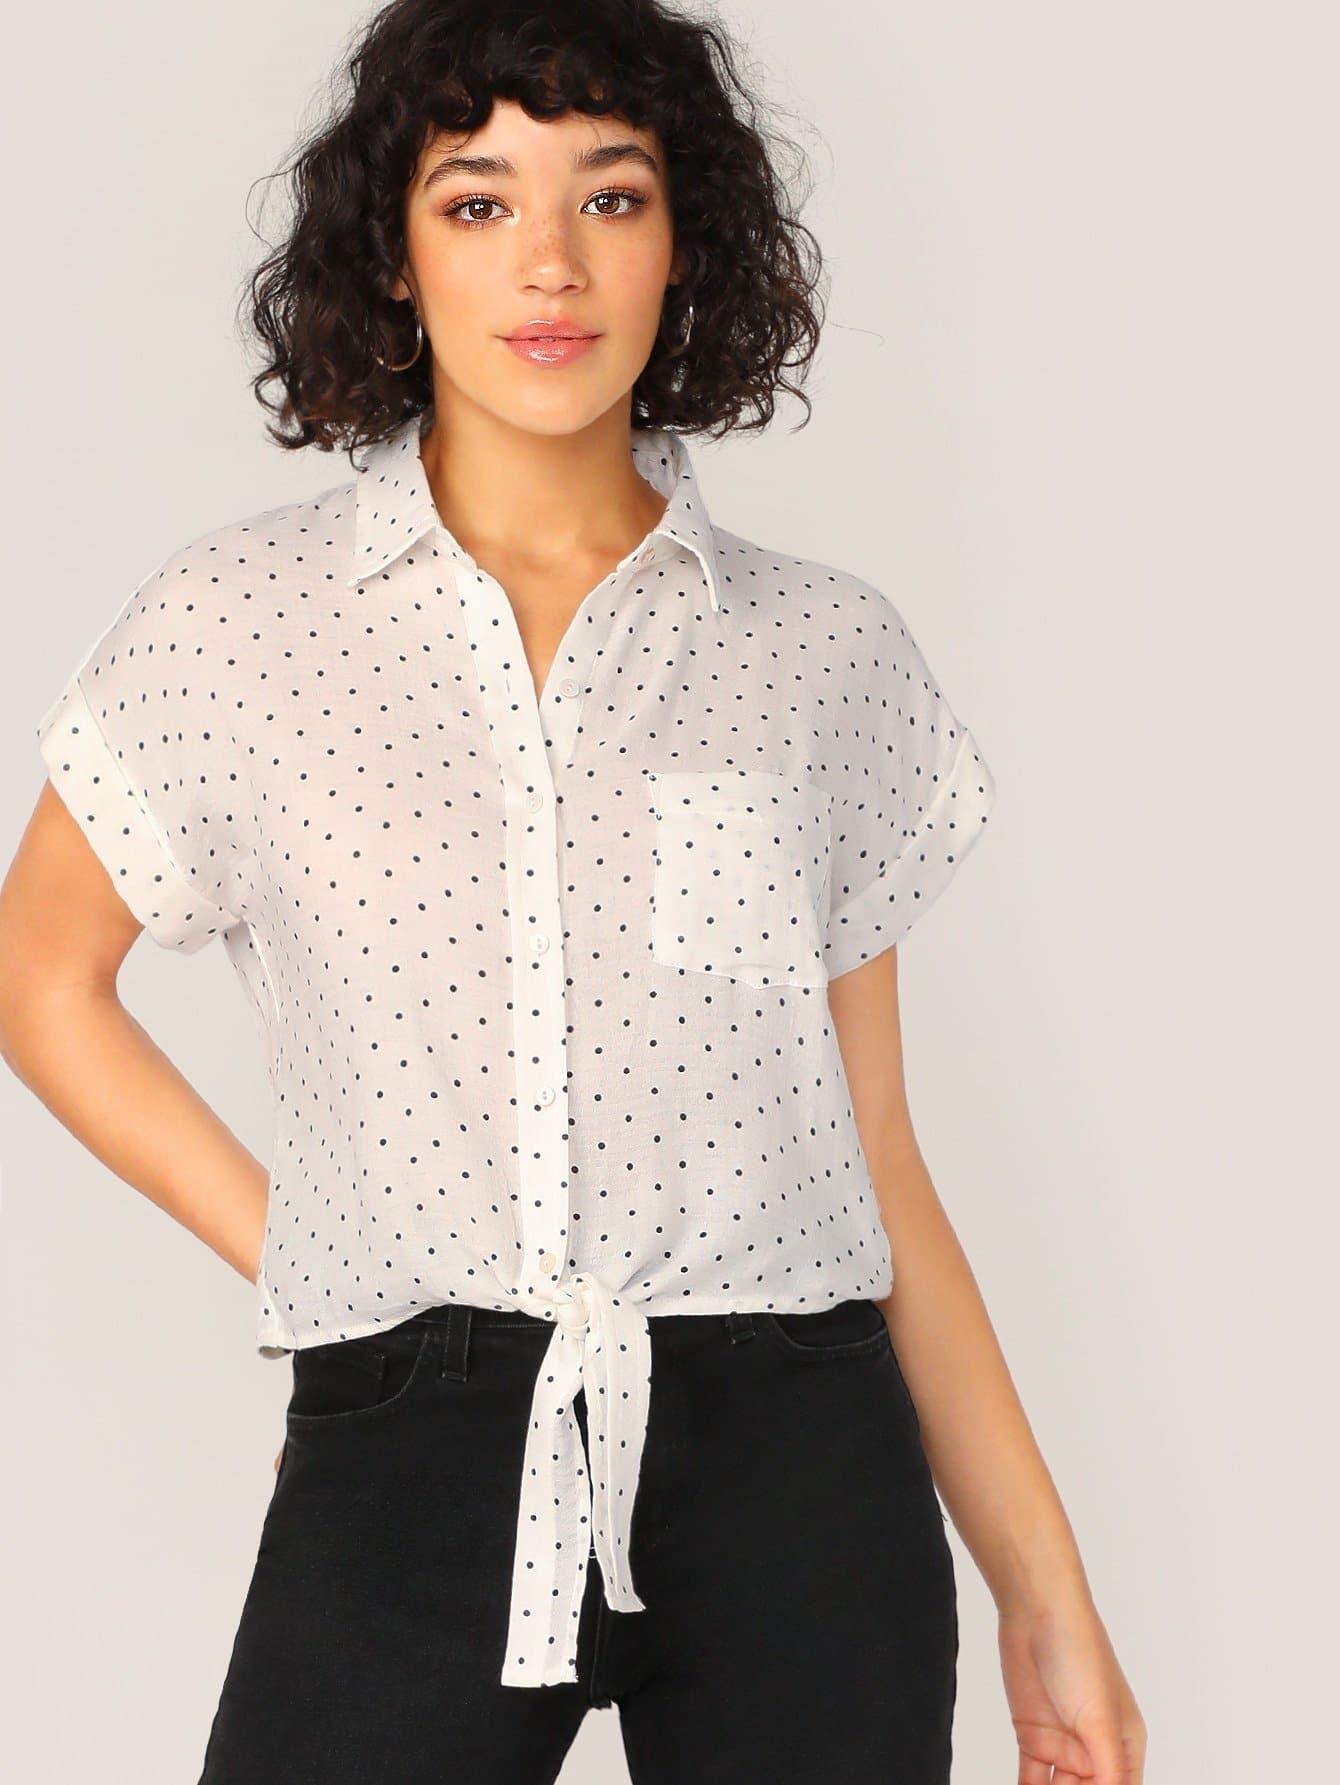 Black and White Button Front Tie Hem Cuff Sleeve Polka Dot Shirt